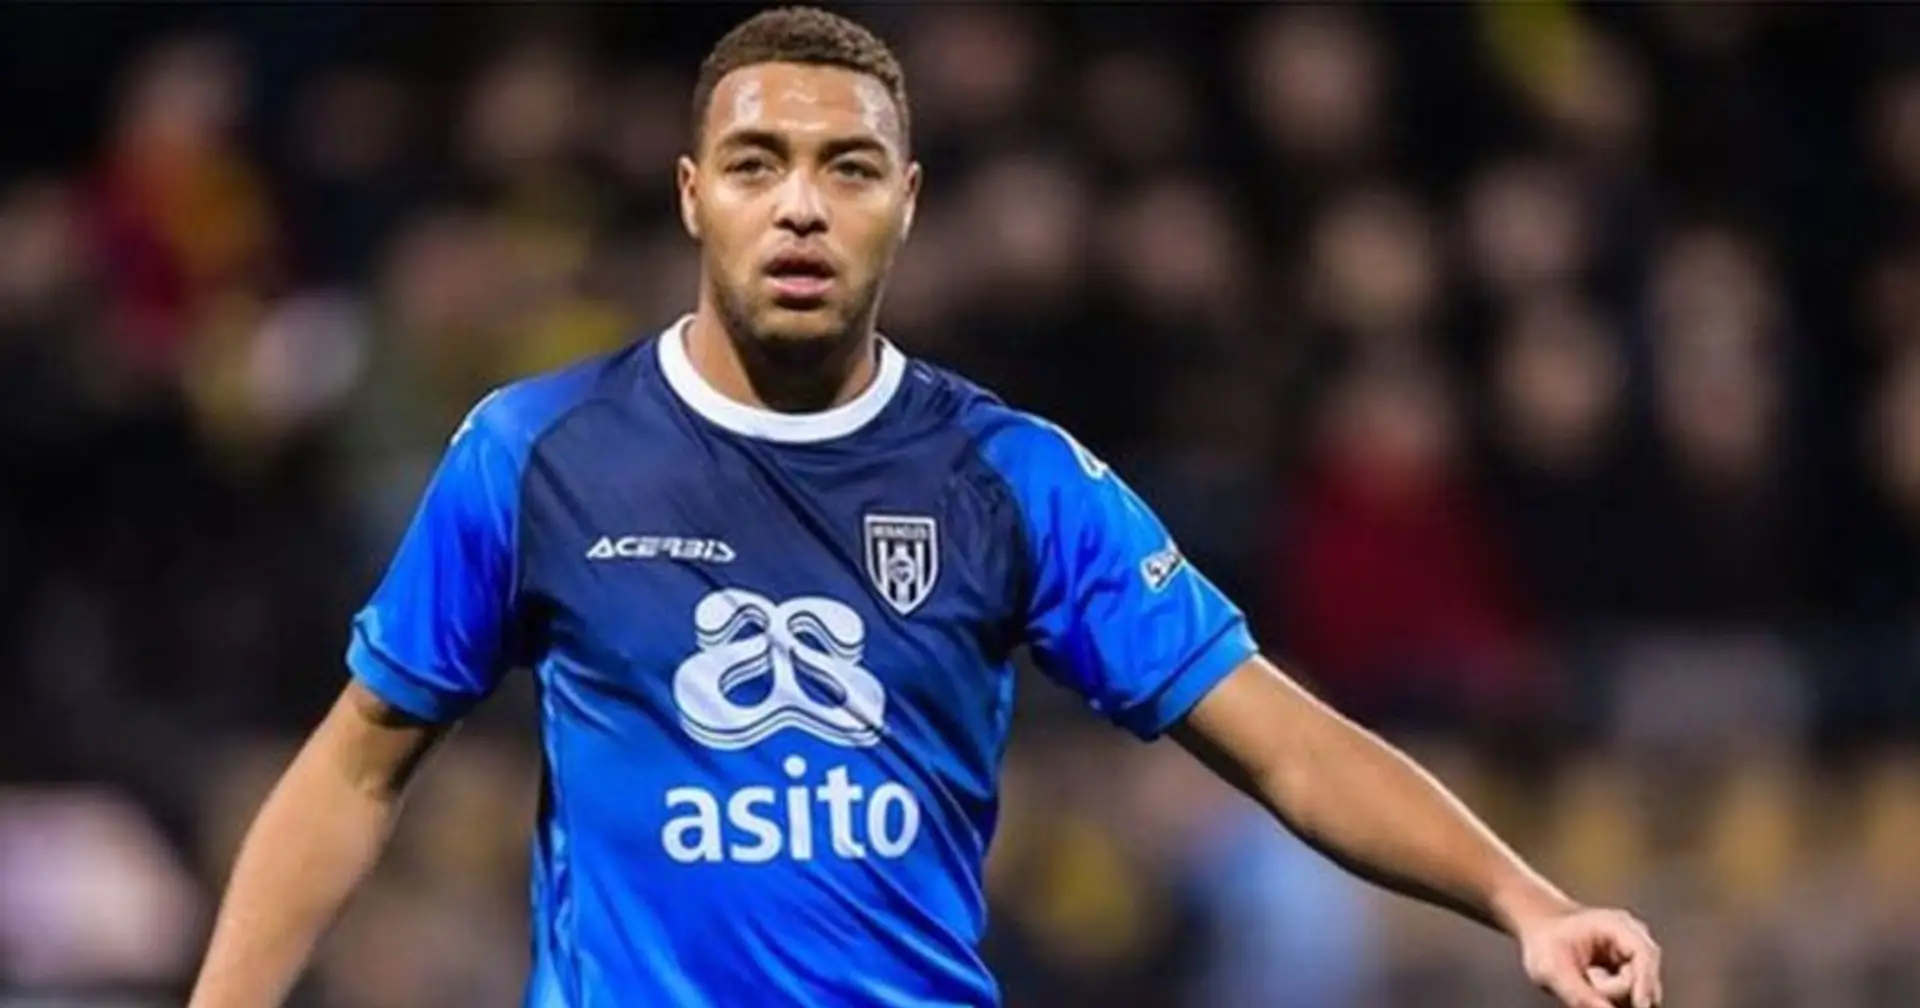 Eredivisie top scorer Cyriel Dessers reveals admiration for Chelsea, expresses desire to play in bigger league